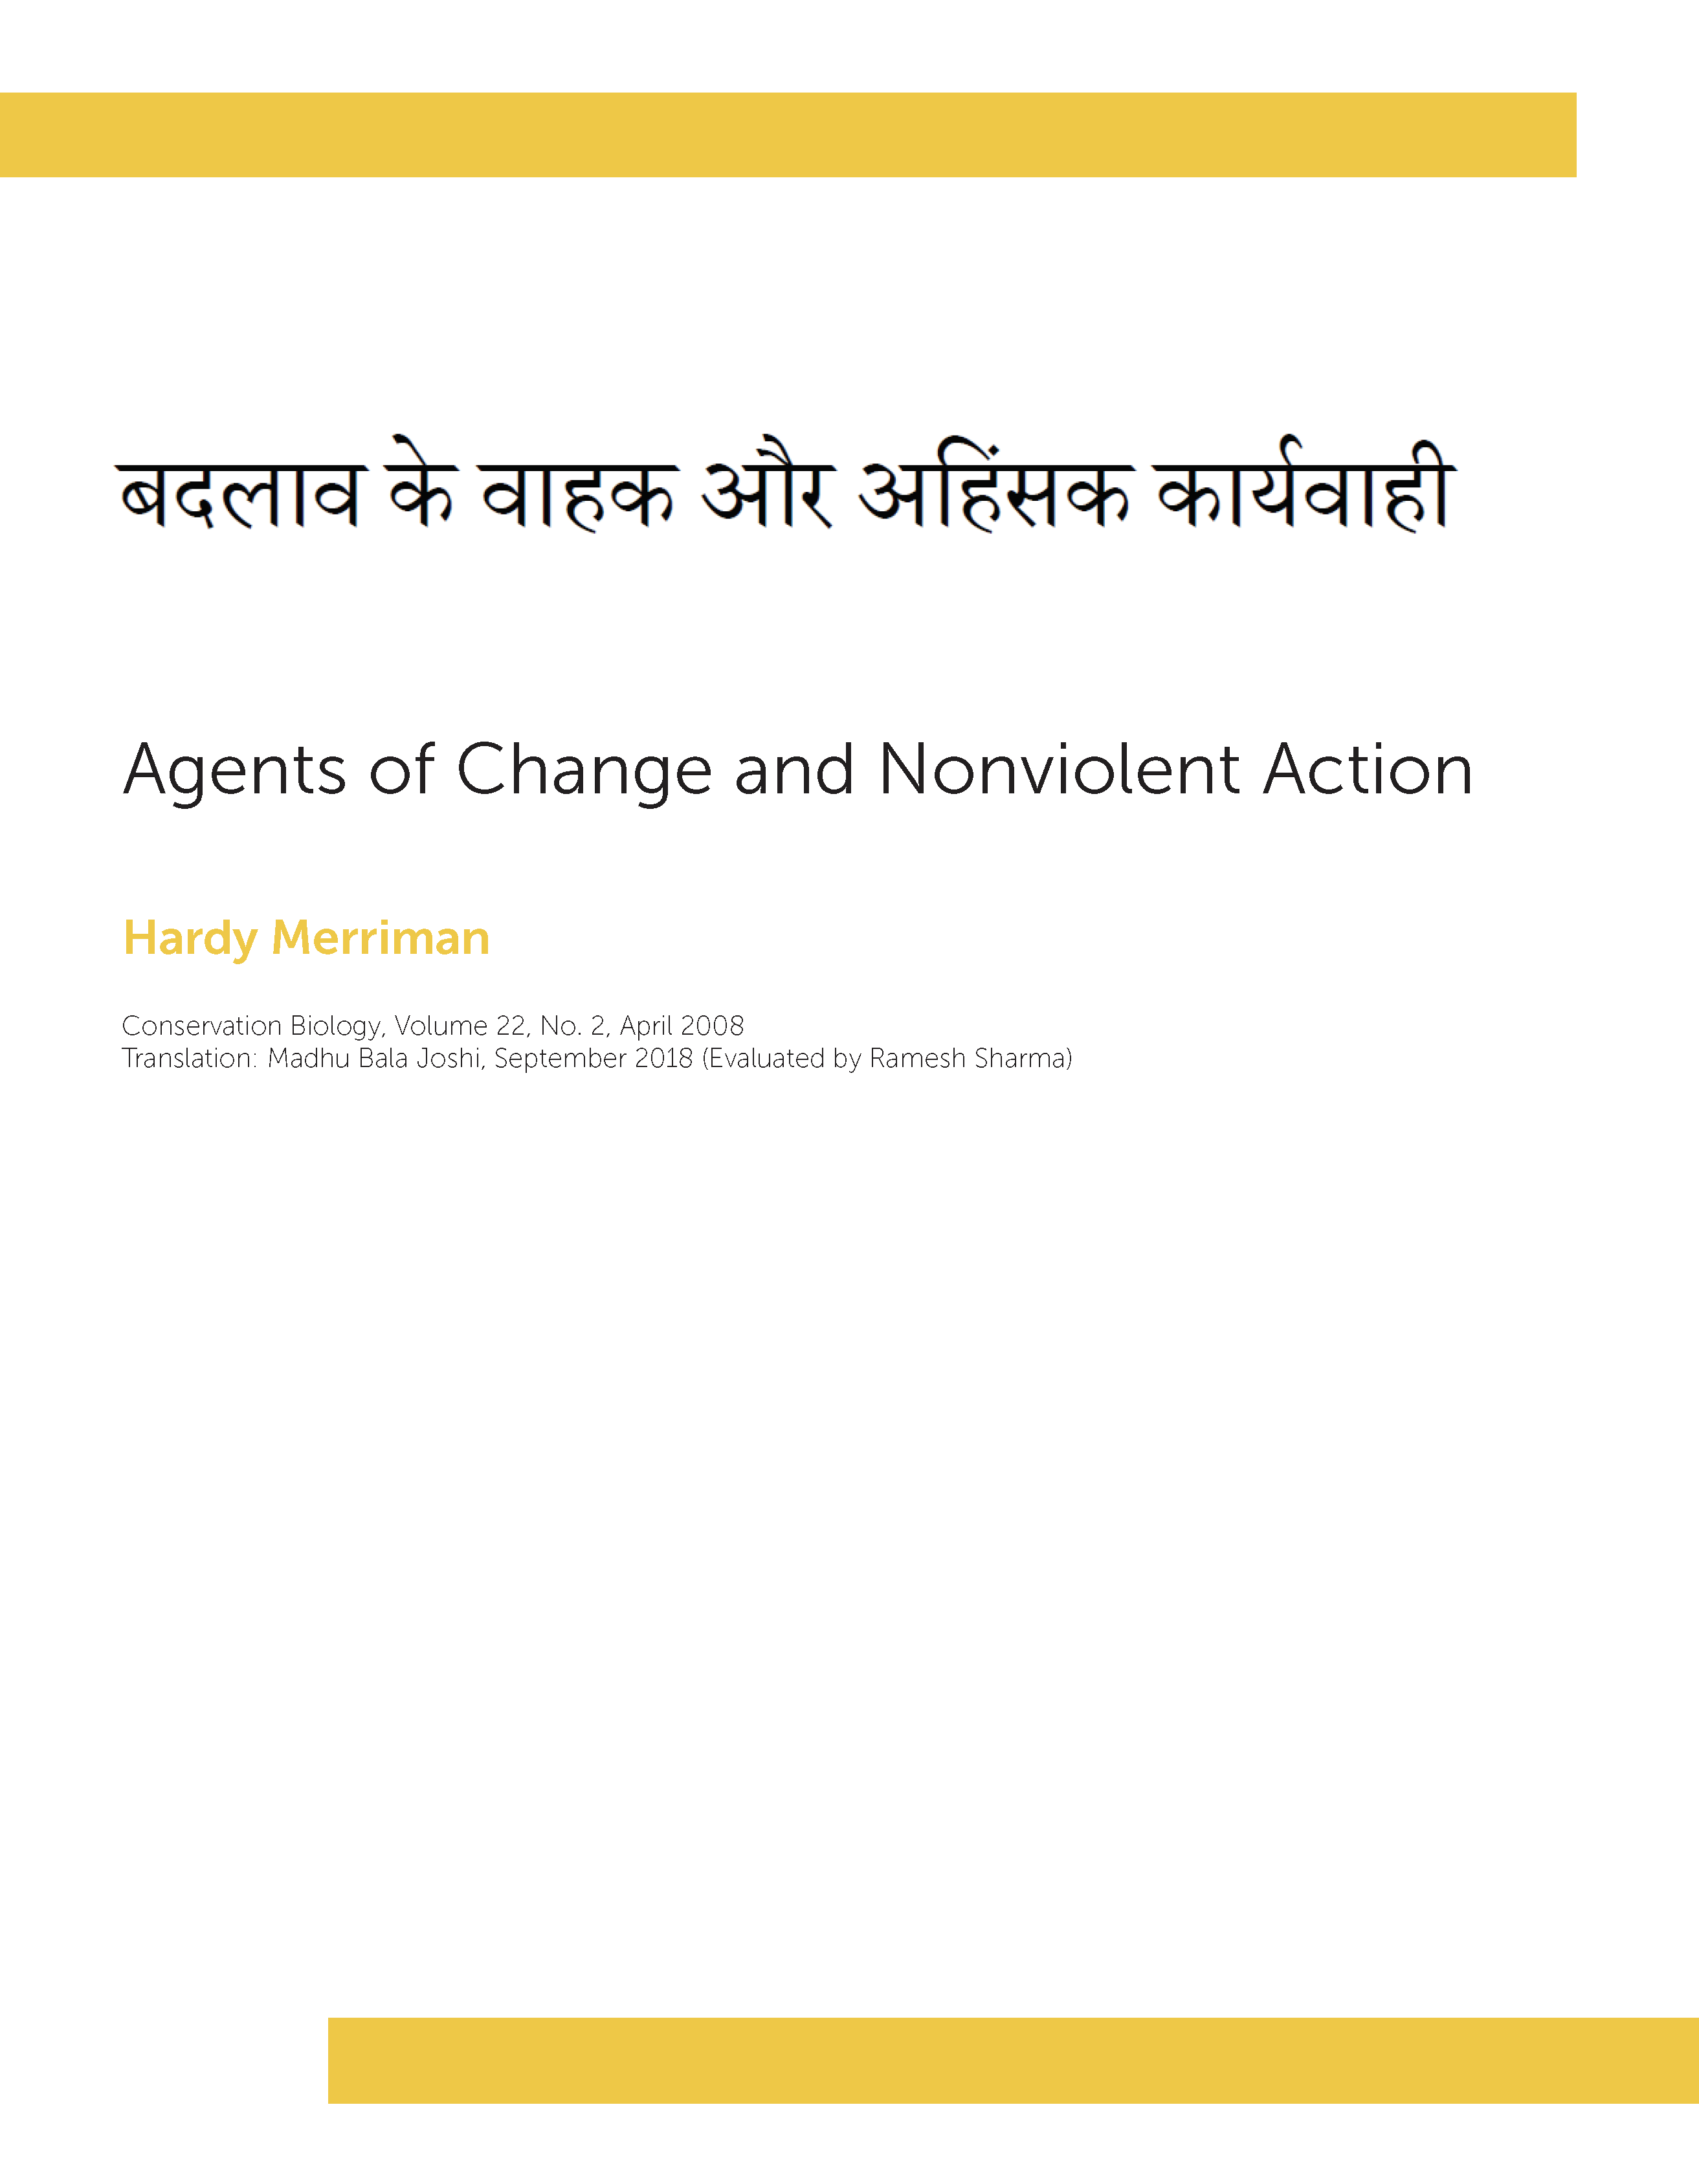 Agents of Change and Nonviolent Action (Hindi)